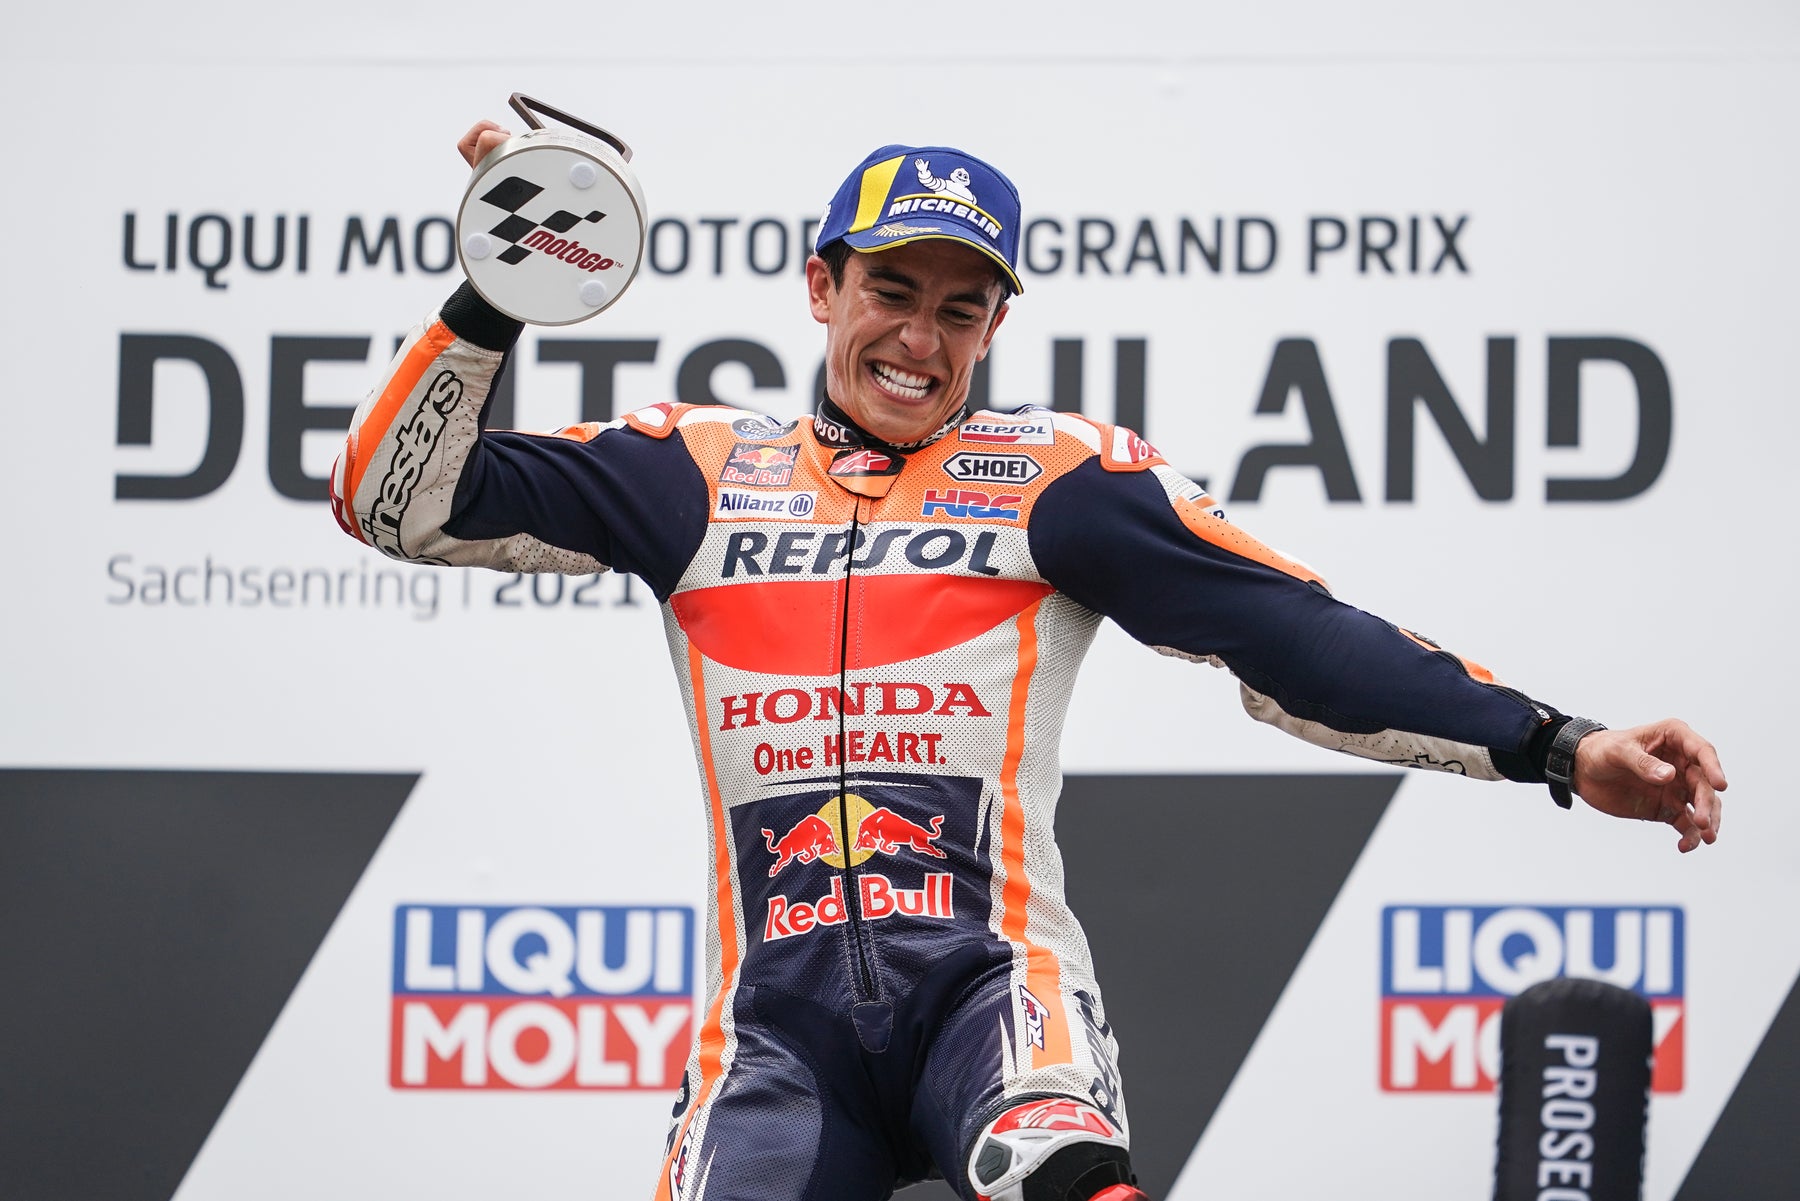 ALPINESTARS PODIUM LOCK-OUT AS MARC MARQUEZ DOMINATES MOTOGP RACE AT THE SACHSENRING, GERMANY